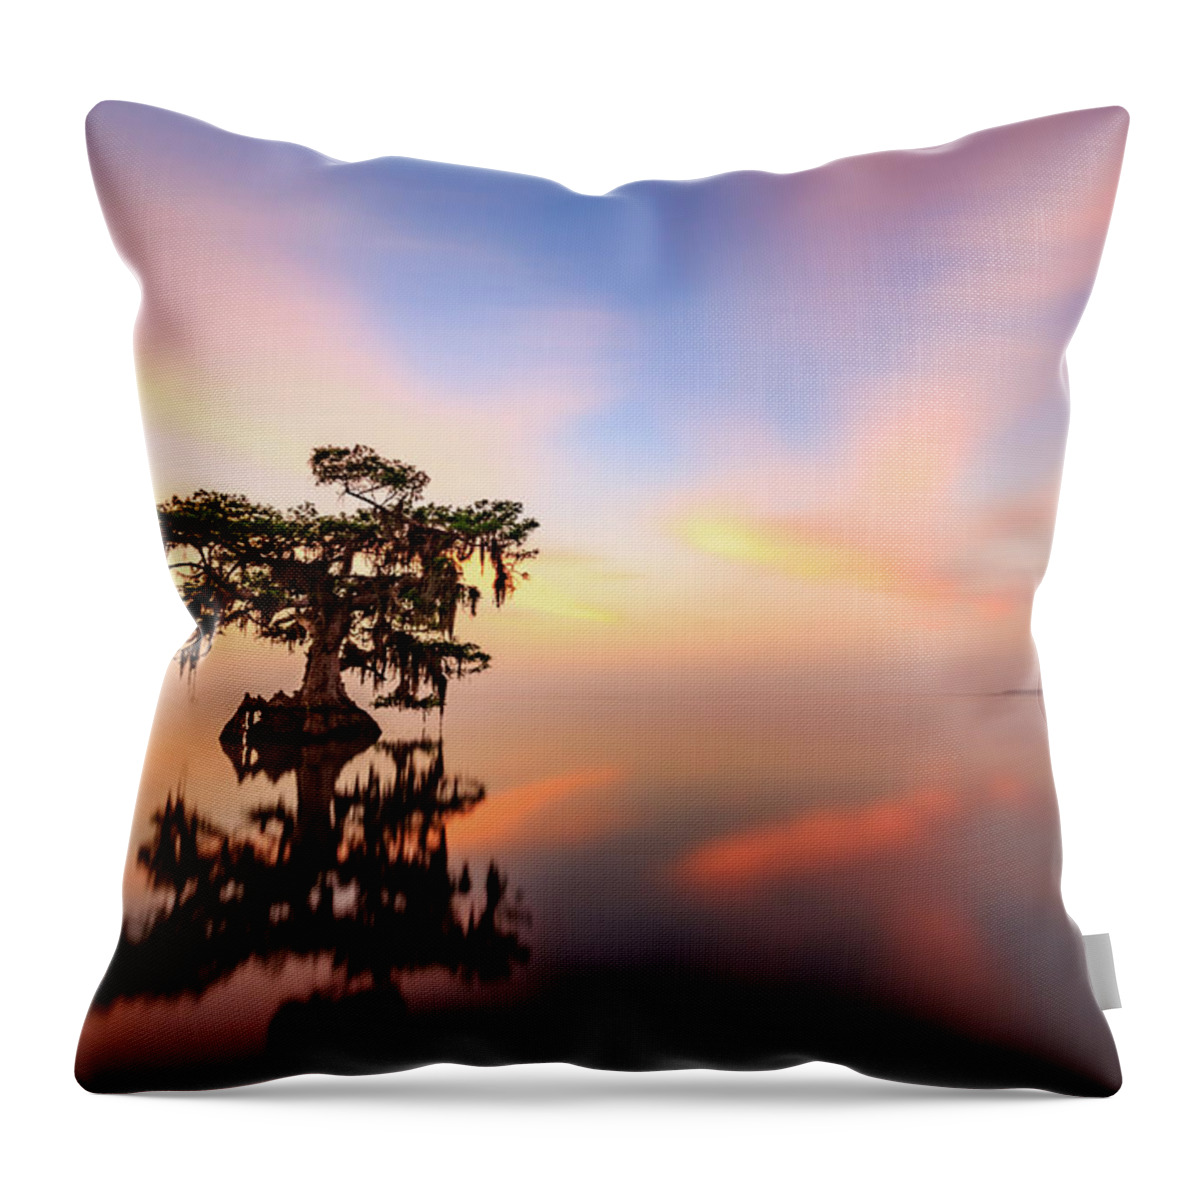 Blue Cypress Lake Throw Pillow featuring the photograph Lake Sunrise by Stefan Mazzola